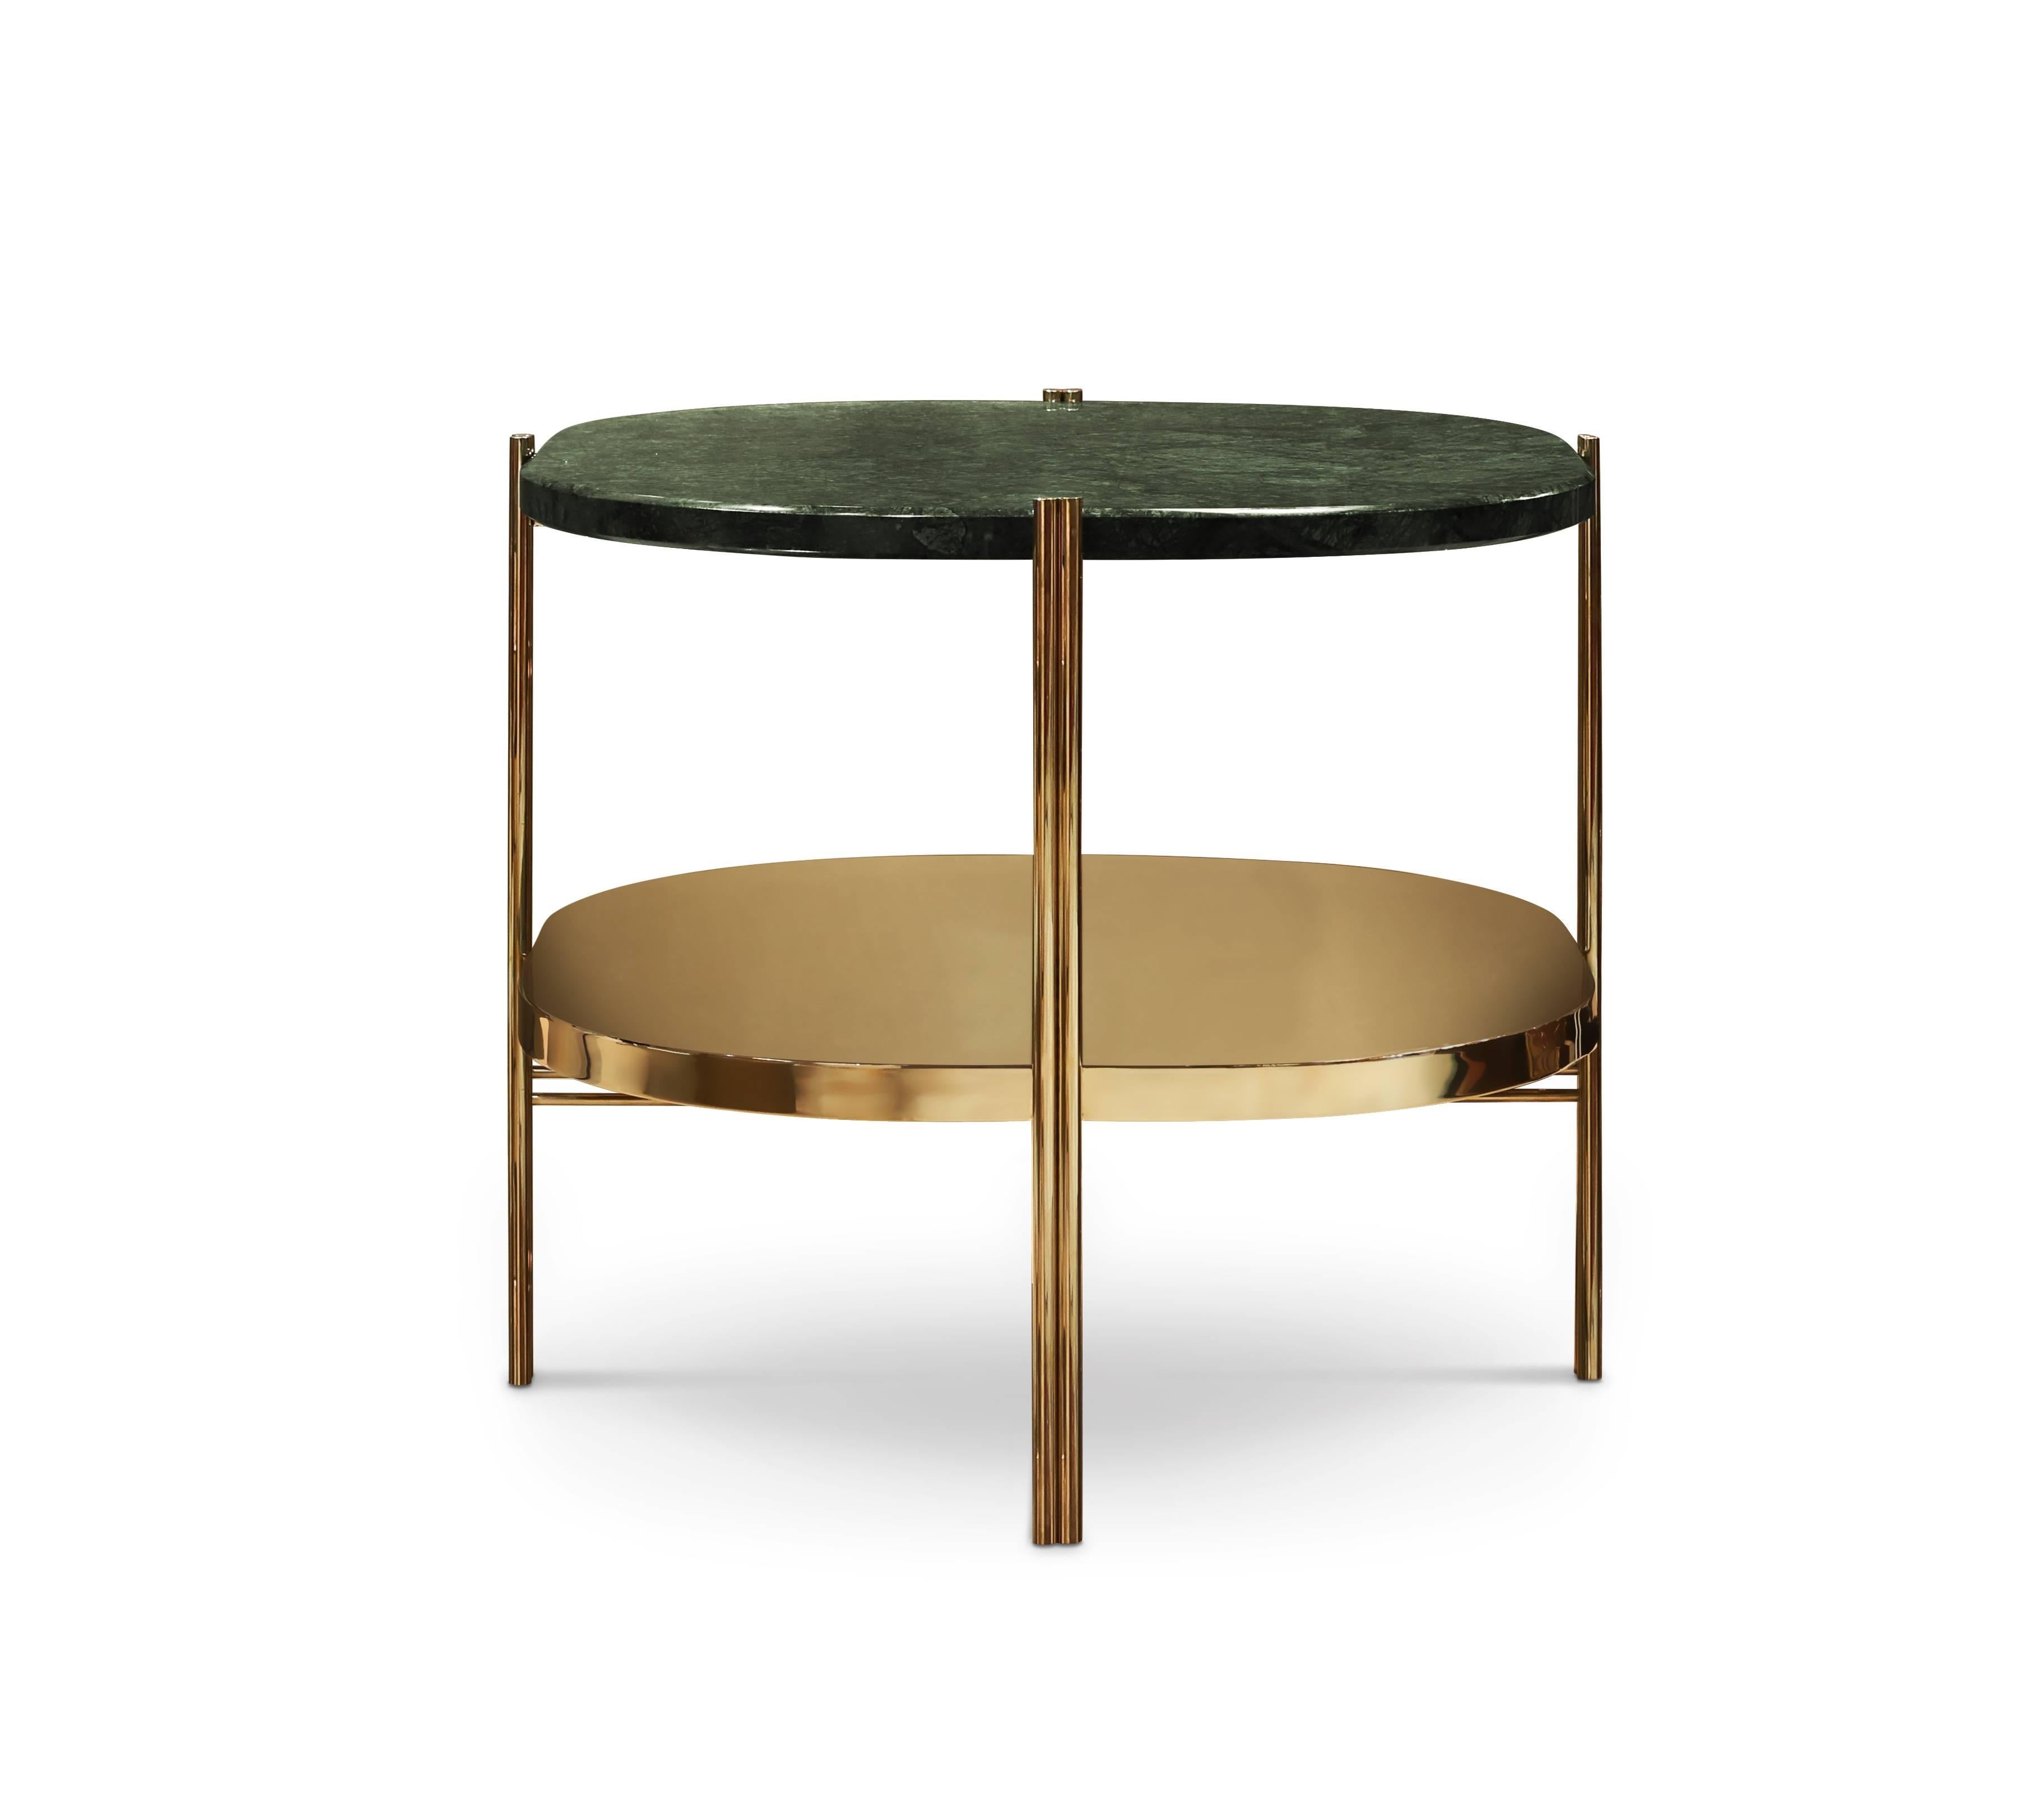 Craig Ellwood was an influential Los Angeles-based modernist architect who fashioned a persona and career through equal parts of a talent for good design, self-promotion and ambition. Our Mid-Century Modern style Craig side table carries this